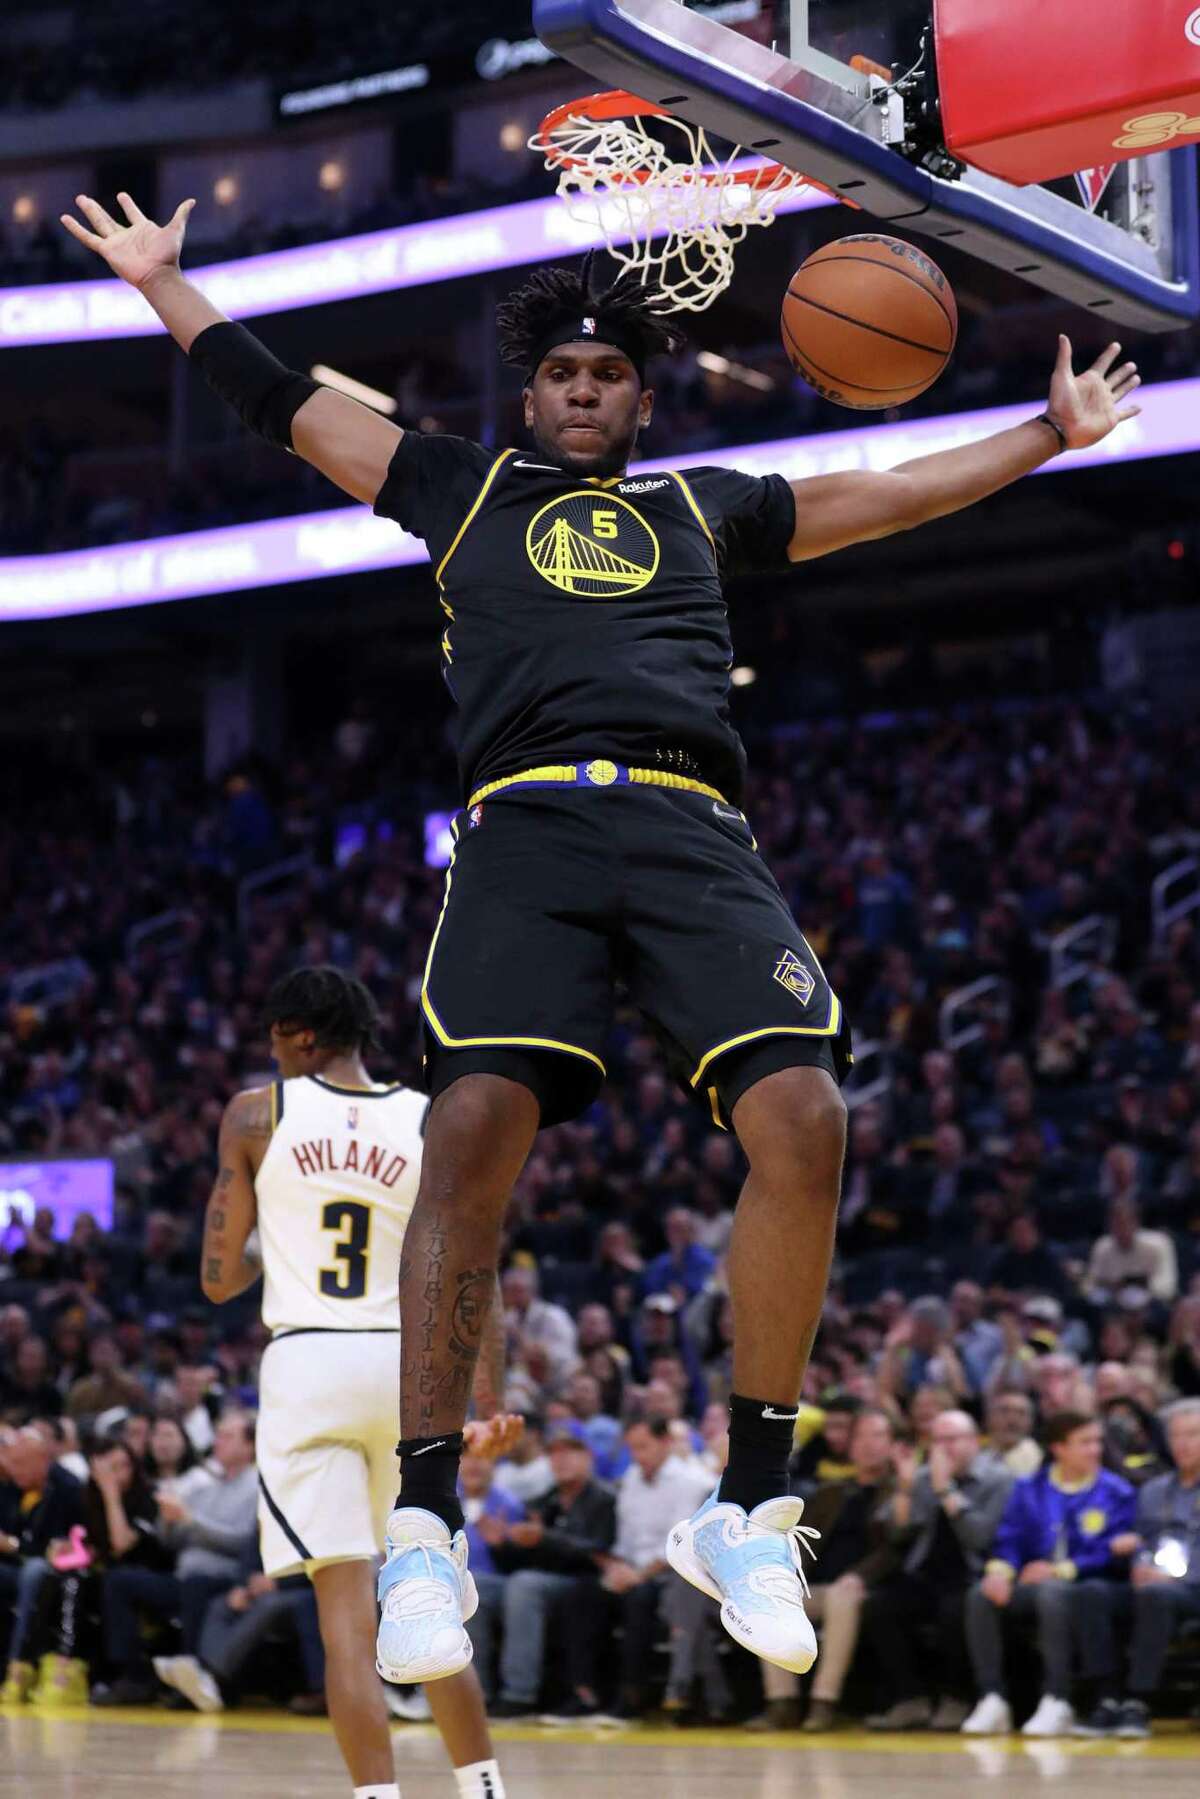 Warriors center Kevon Looney, who is an unrestricted free agent in July, has been key to the team’s recent wins.